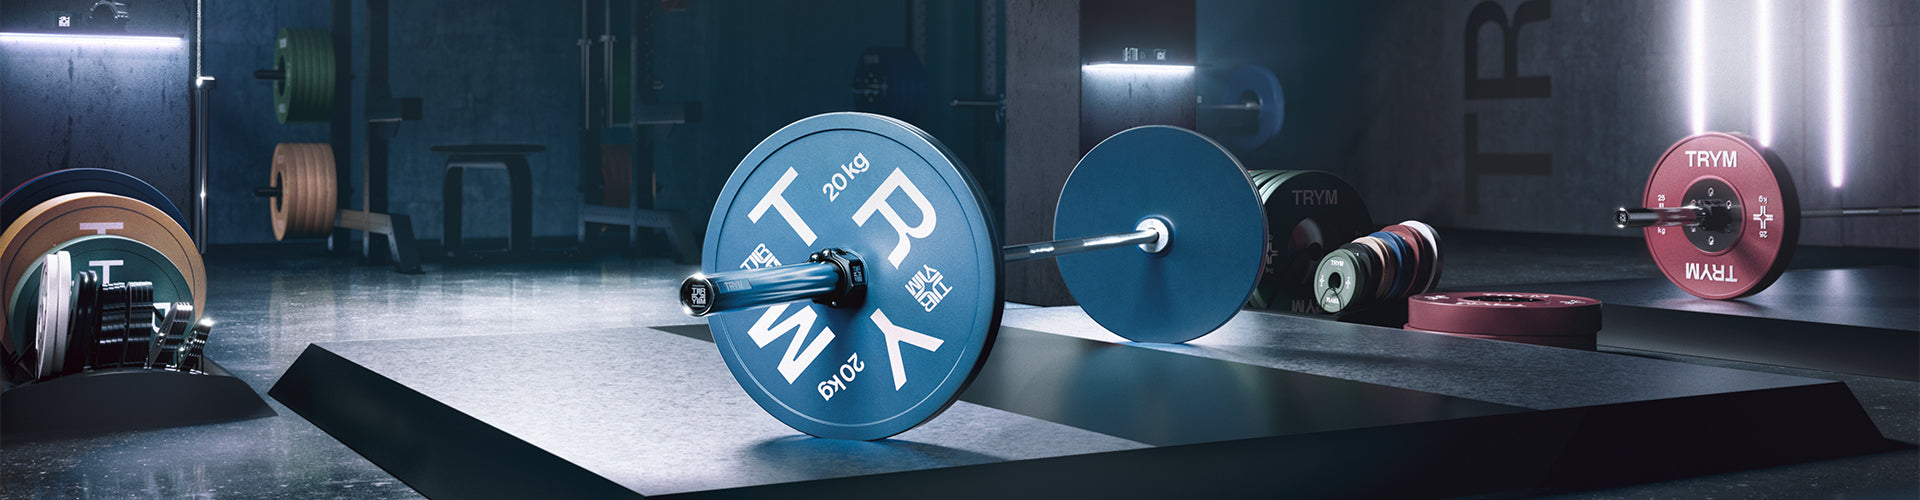 Speciality Barbells